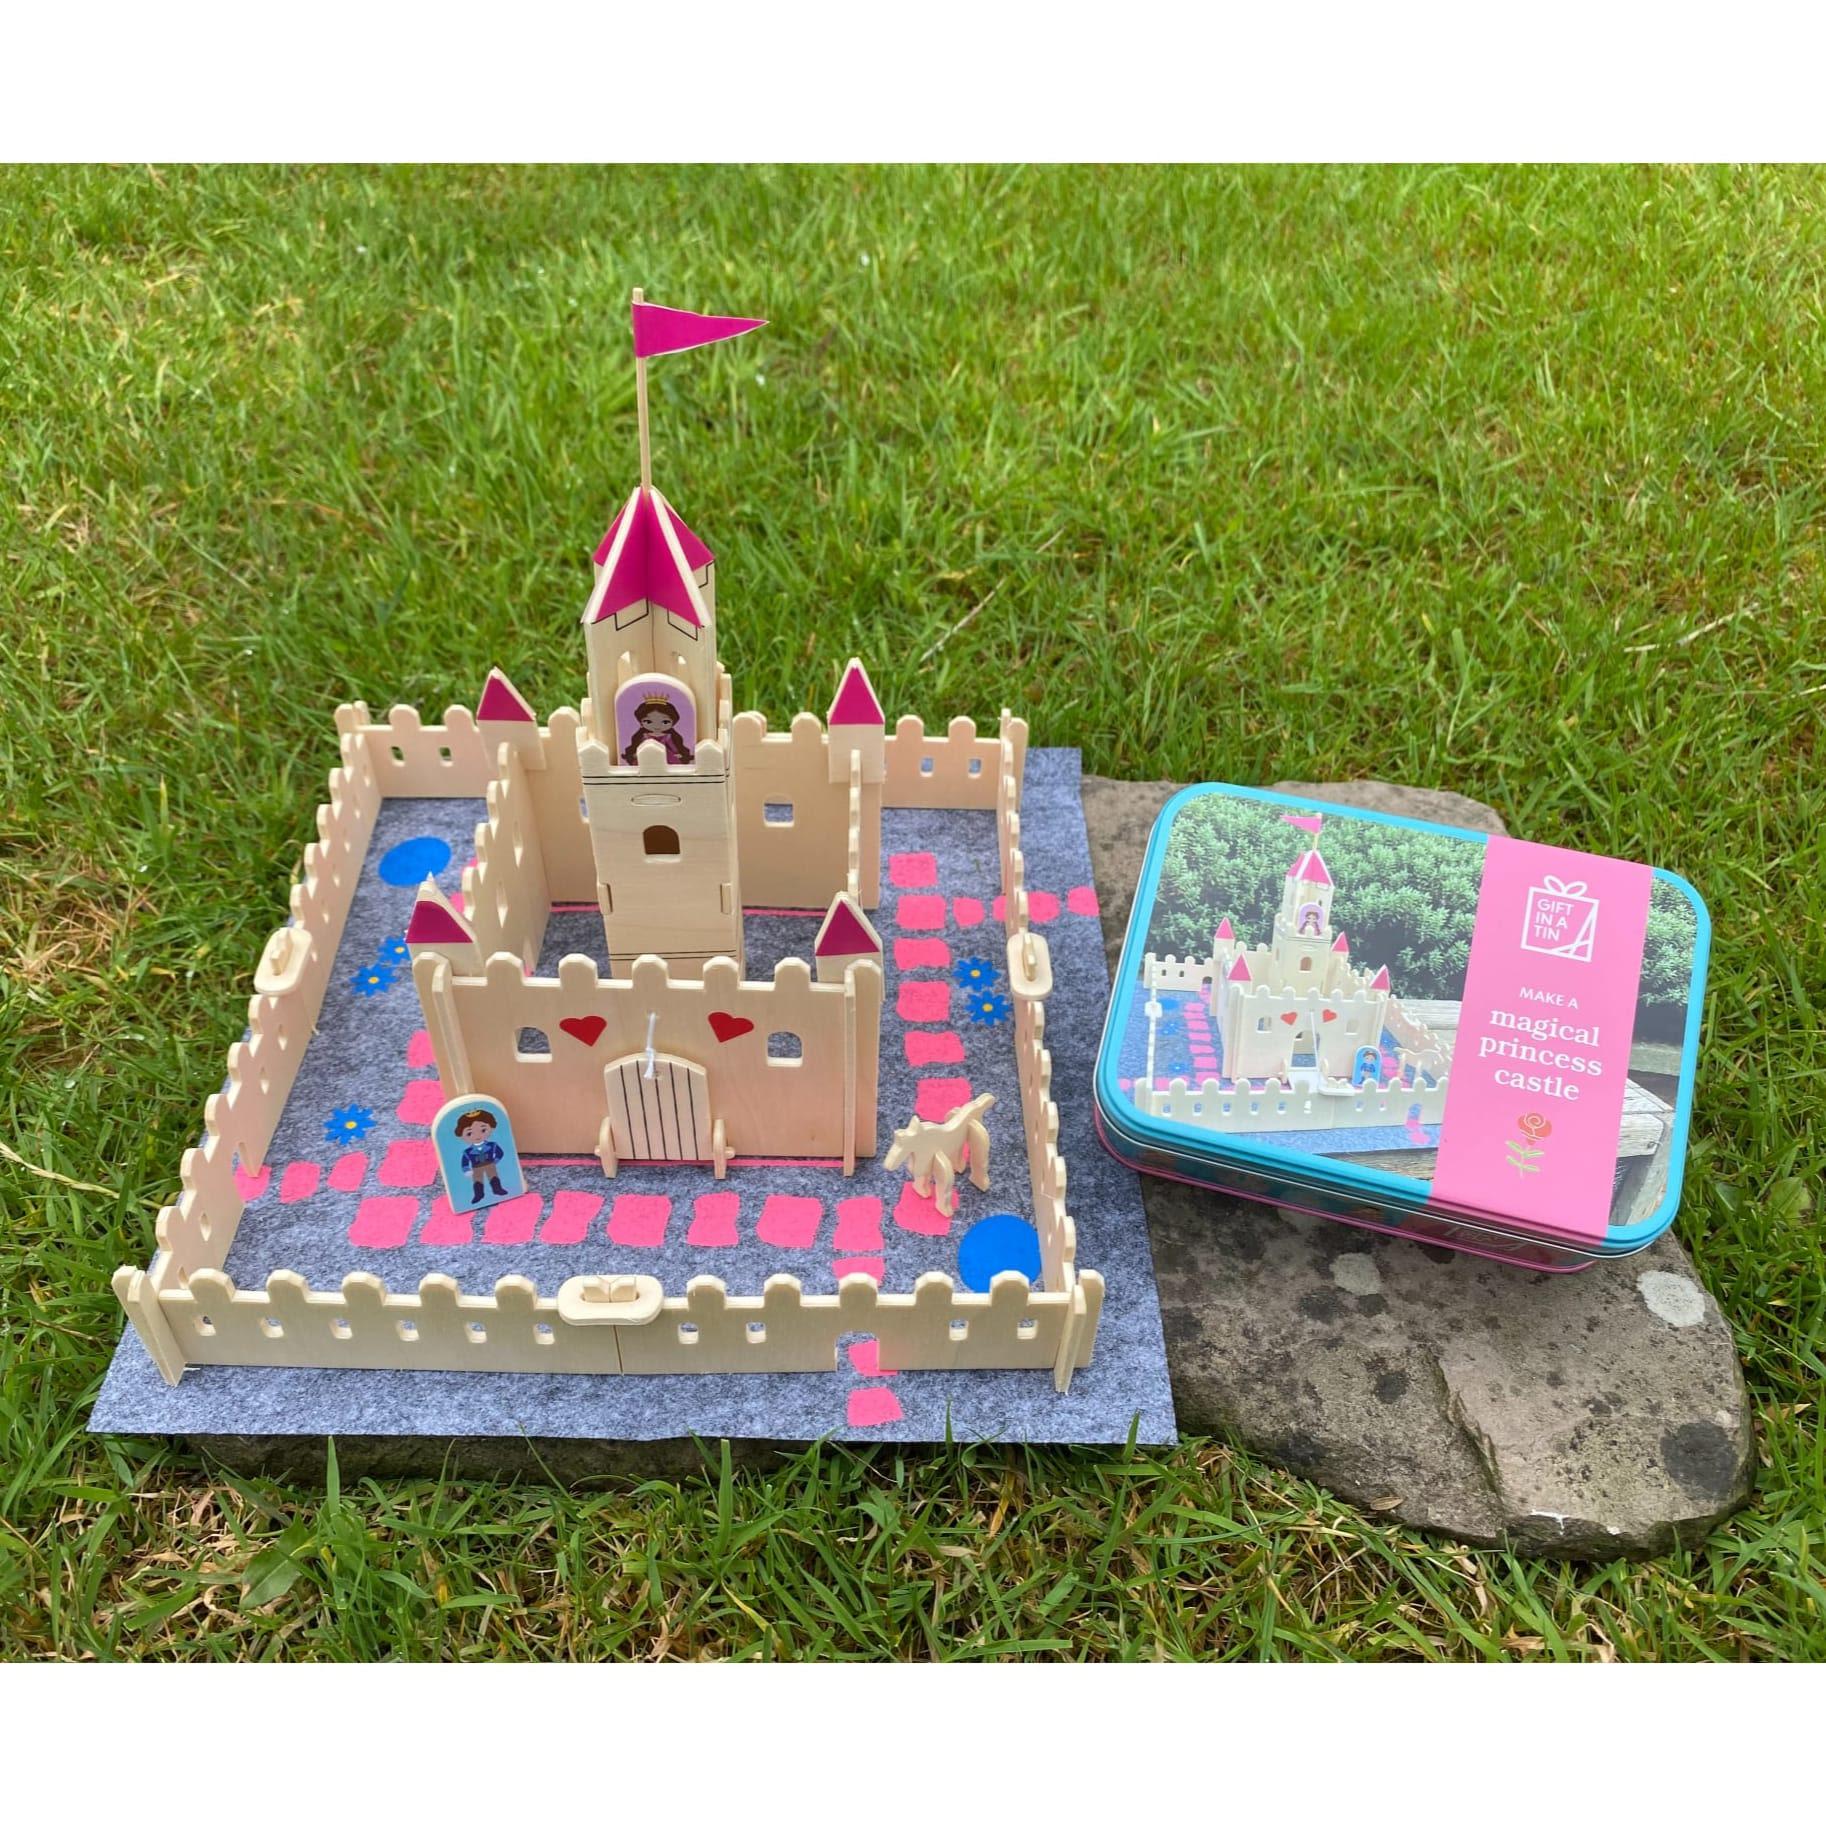 Gift In A Tin Build Apples To Pears Castle In A Tin Construction Kit